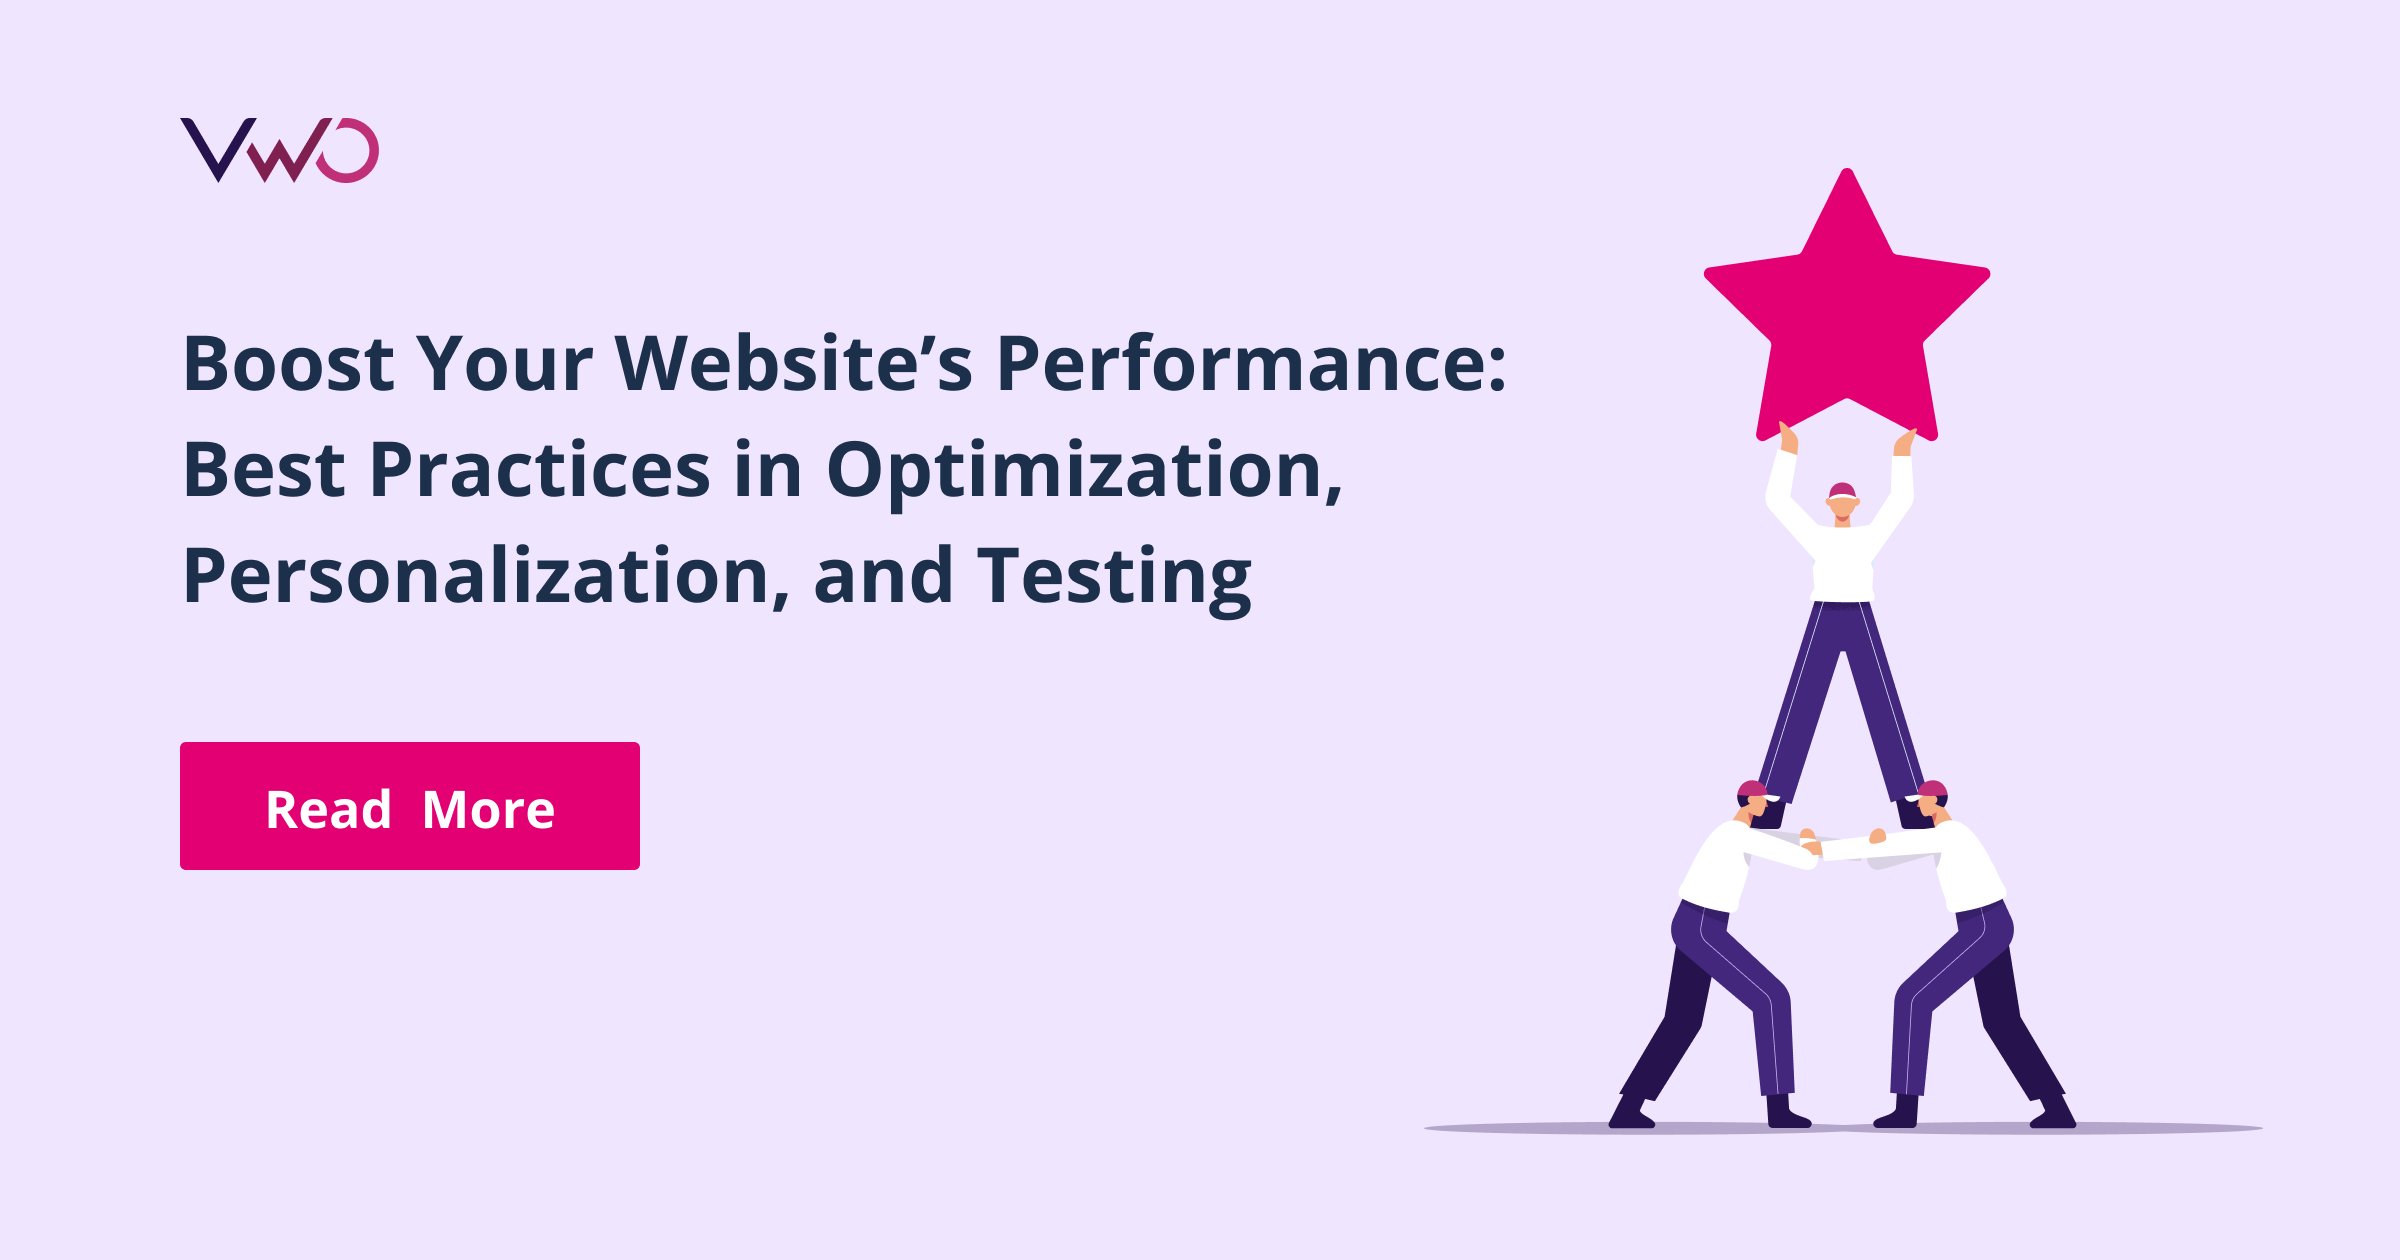 Best Practices in Optimization, Personalization, and Testing